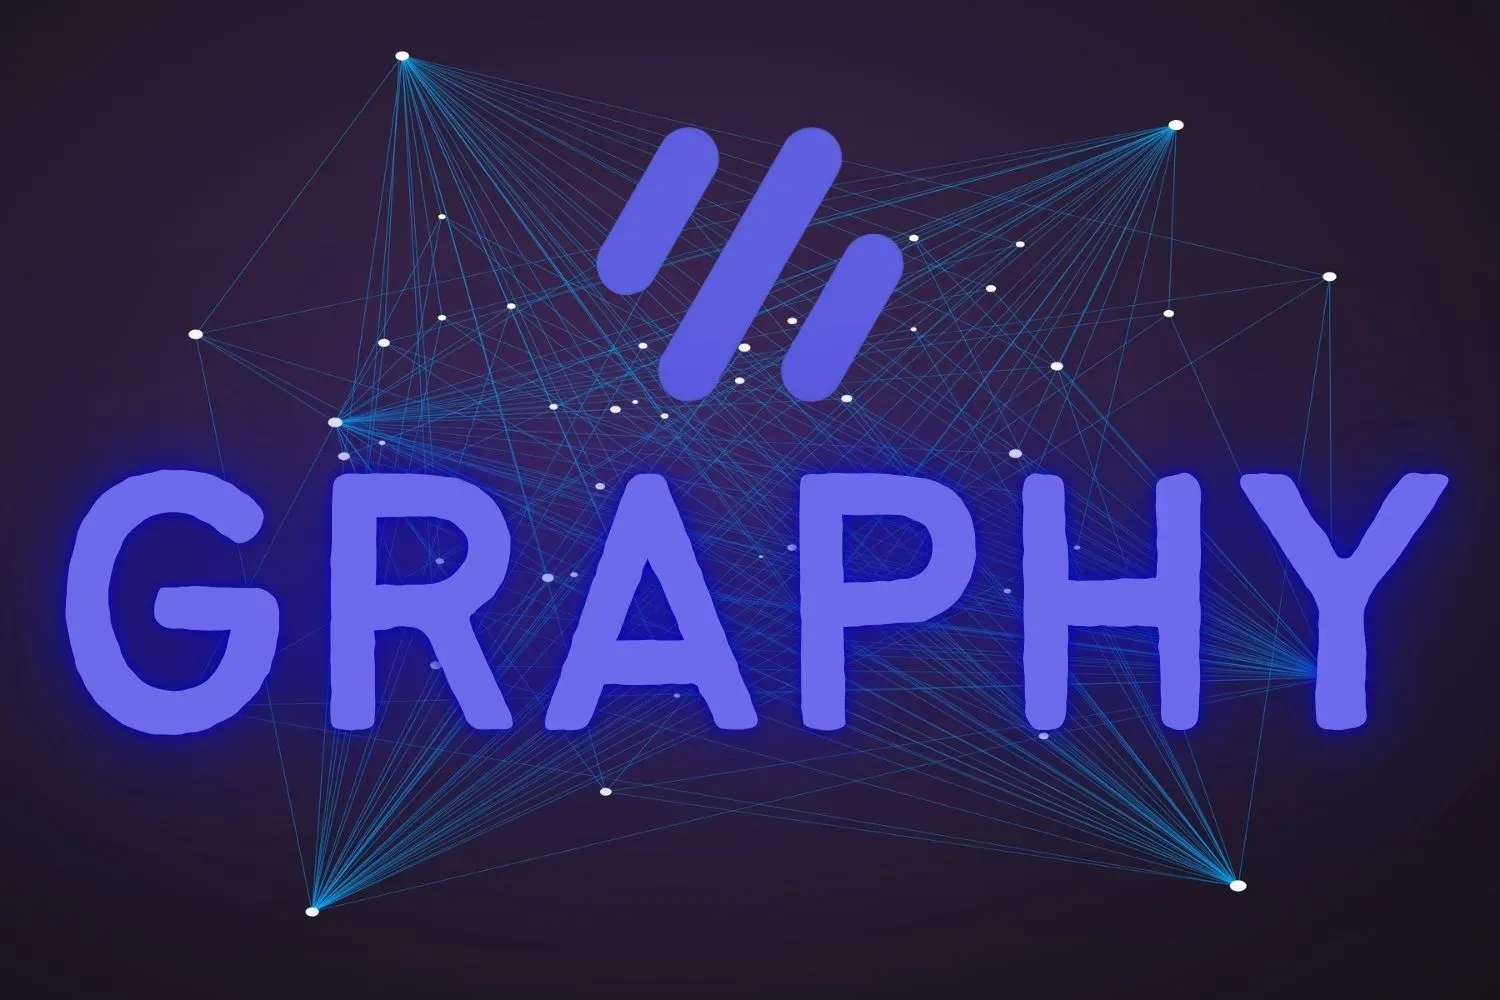 Graphy.App - Data Visualization and Sharing Tool